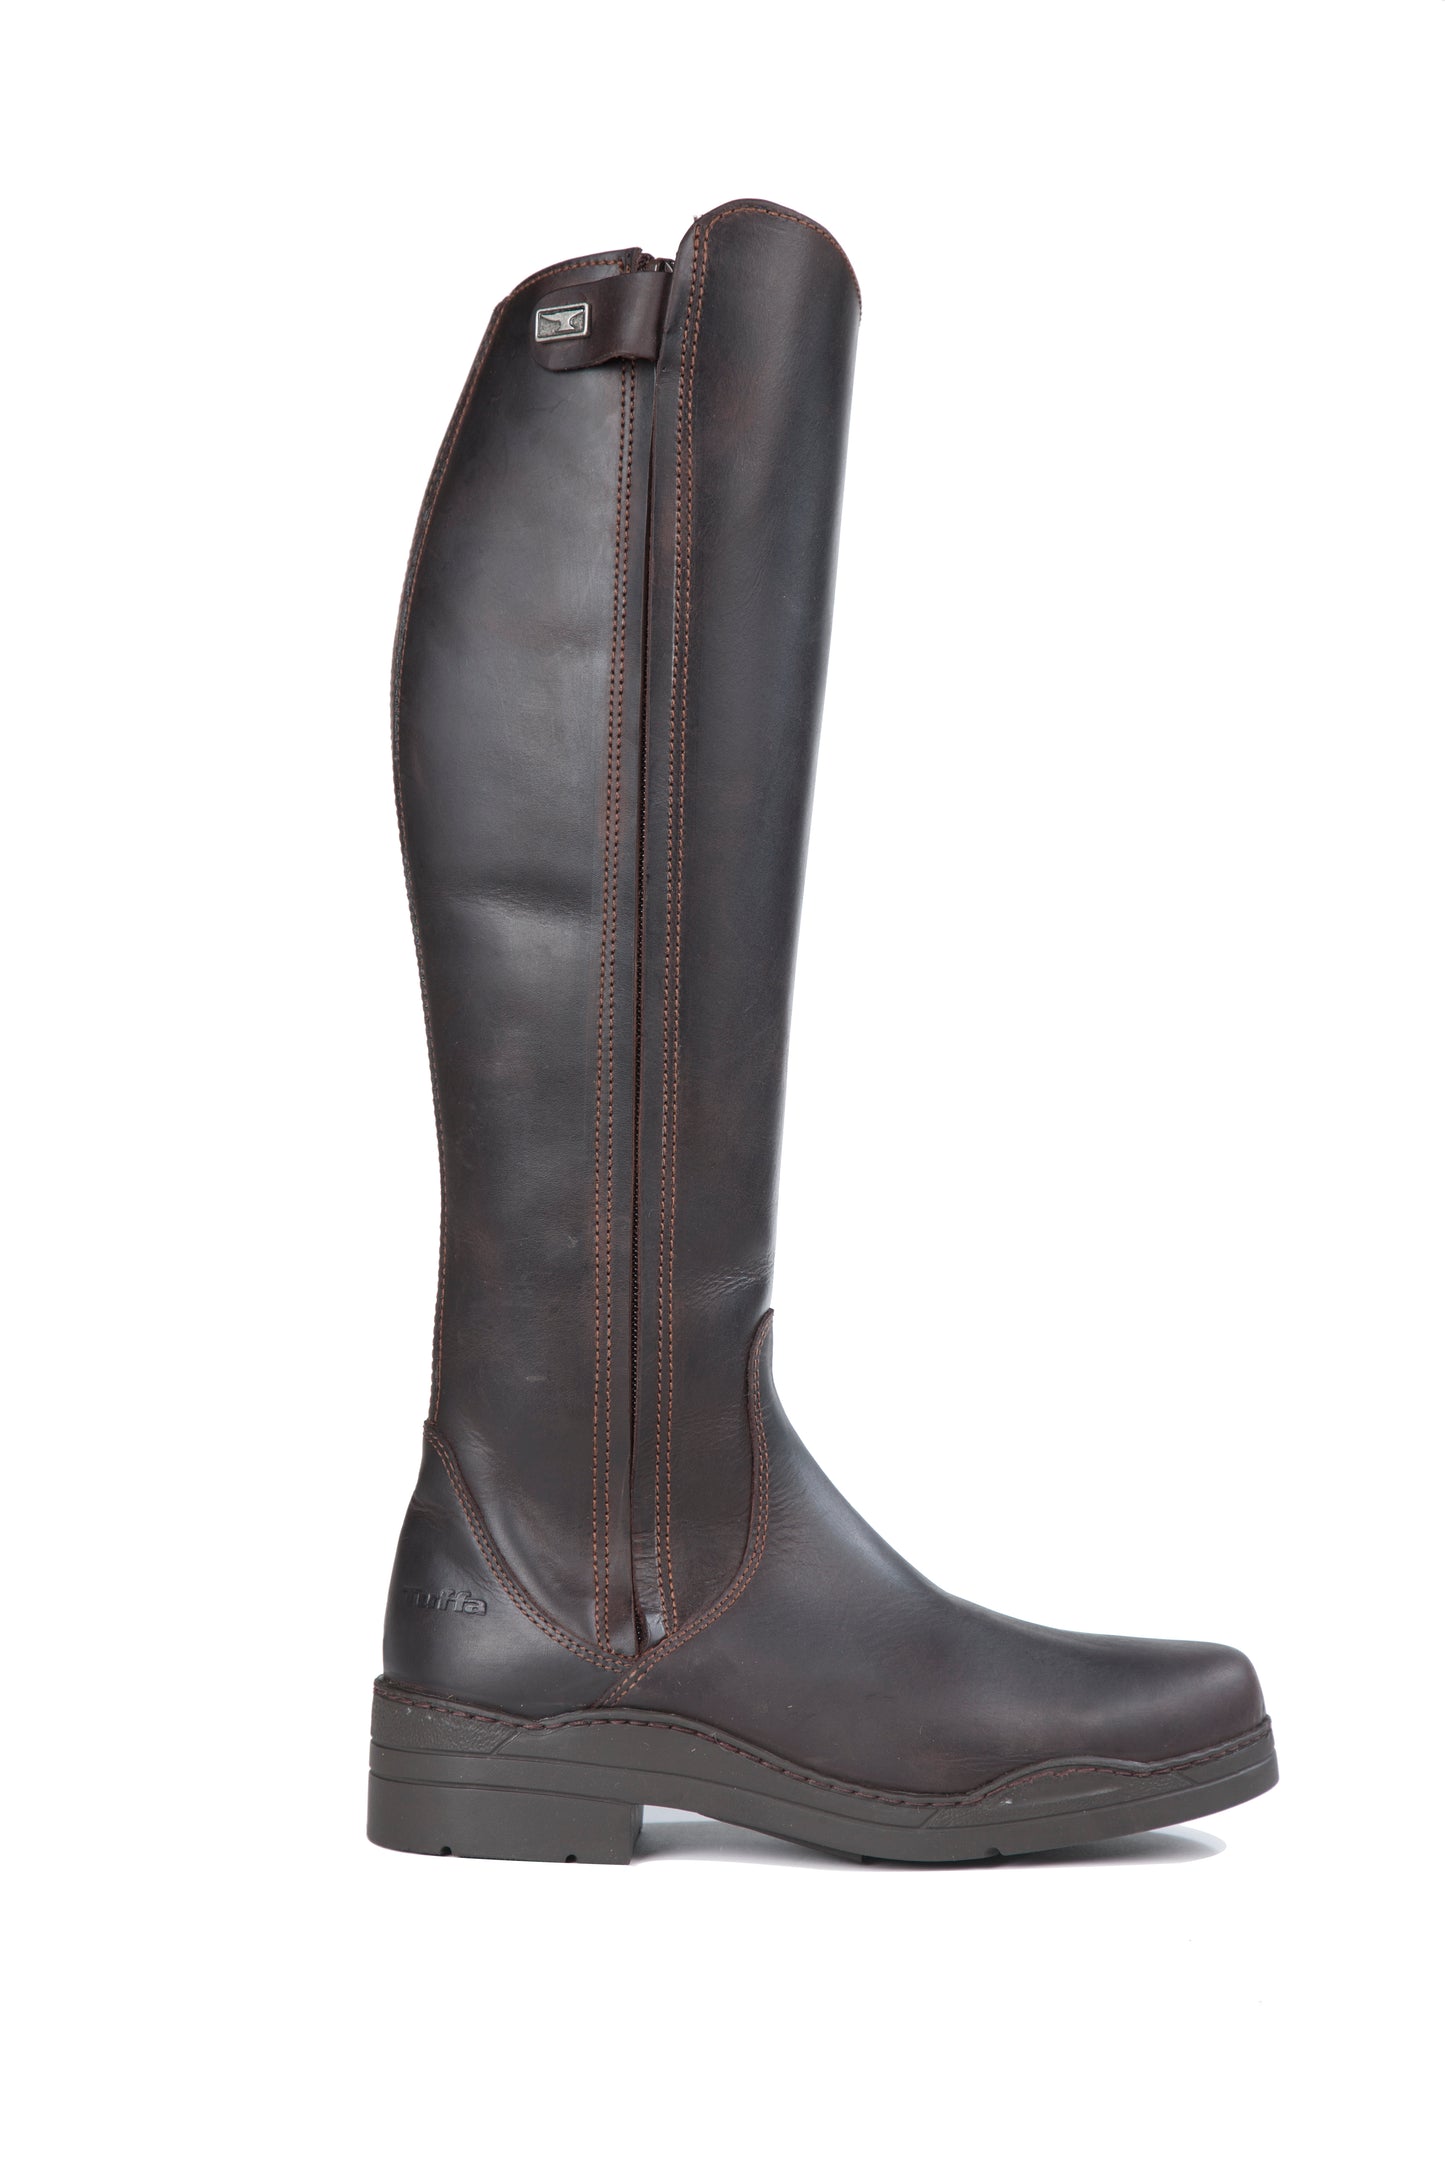 Bespoke Riding Boots, Derby